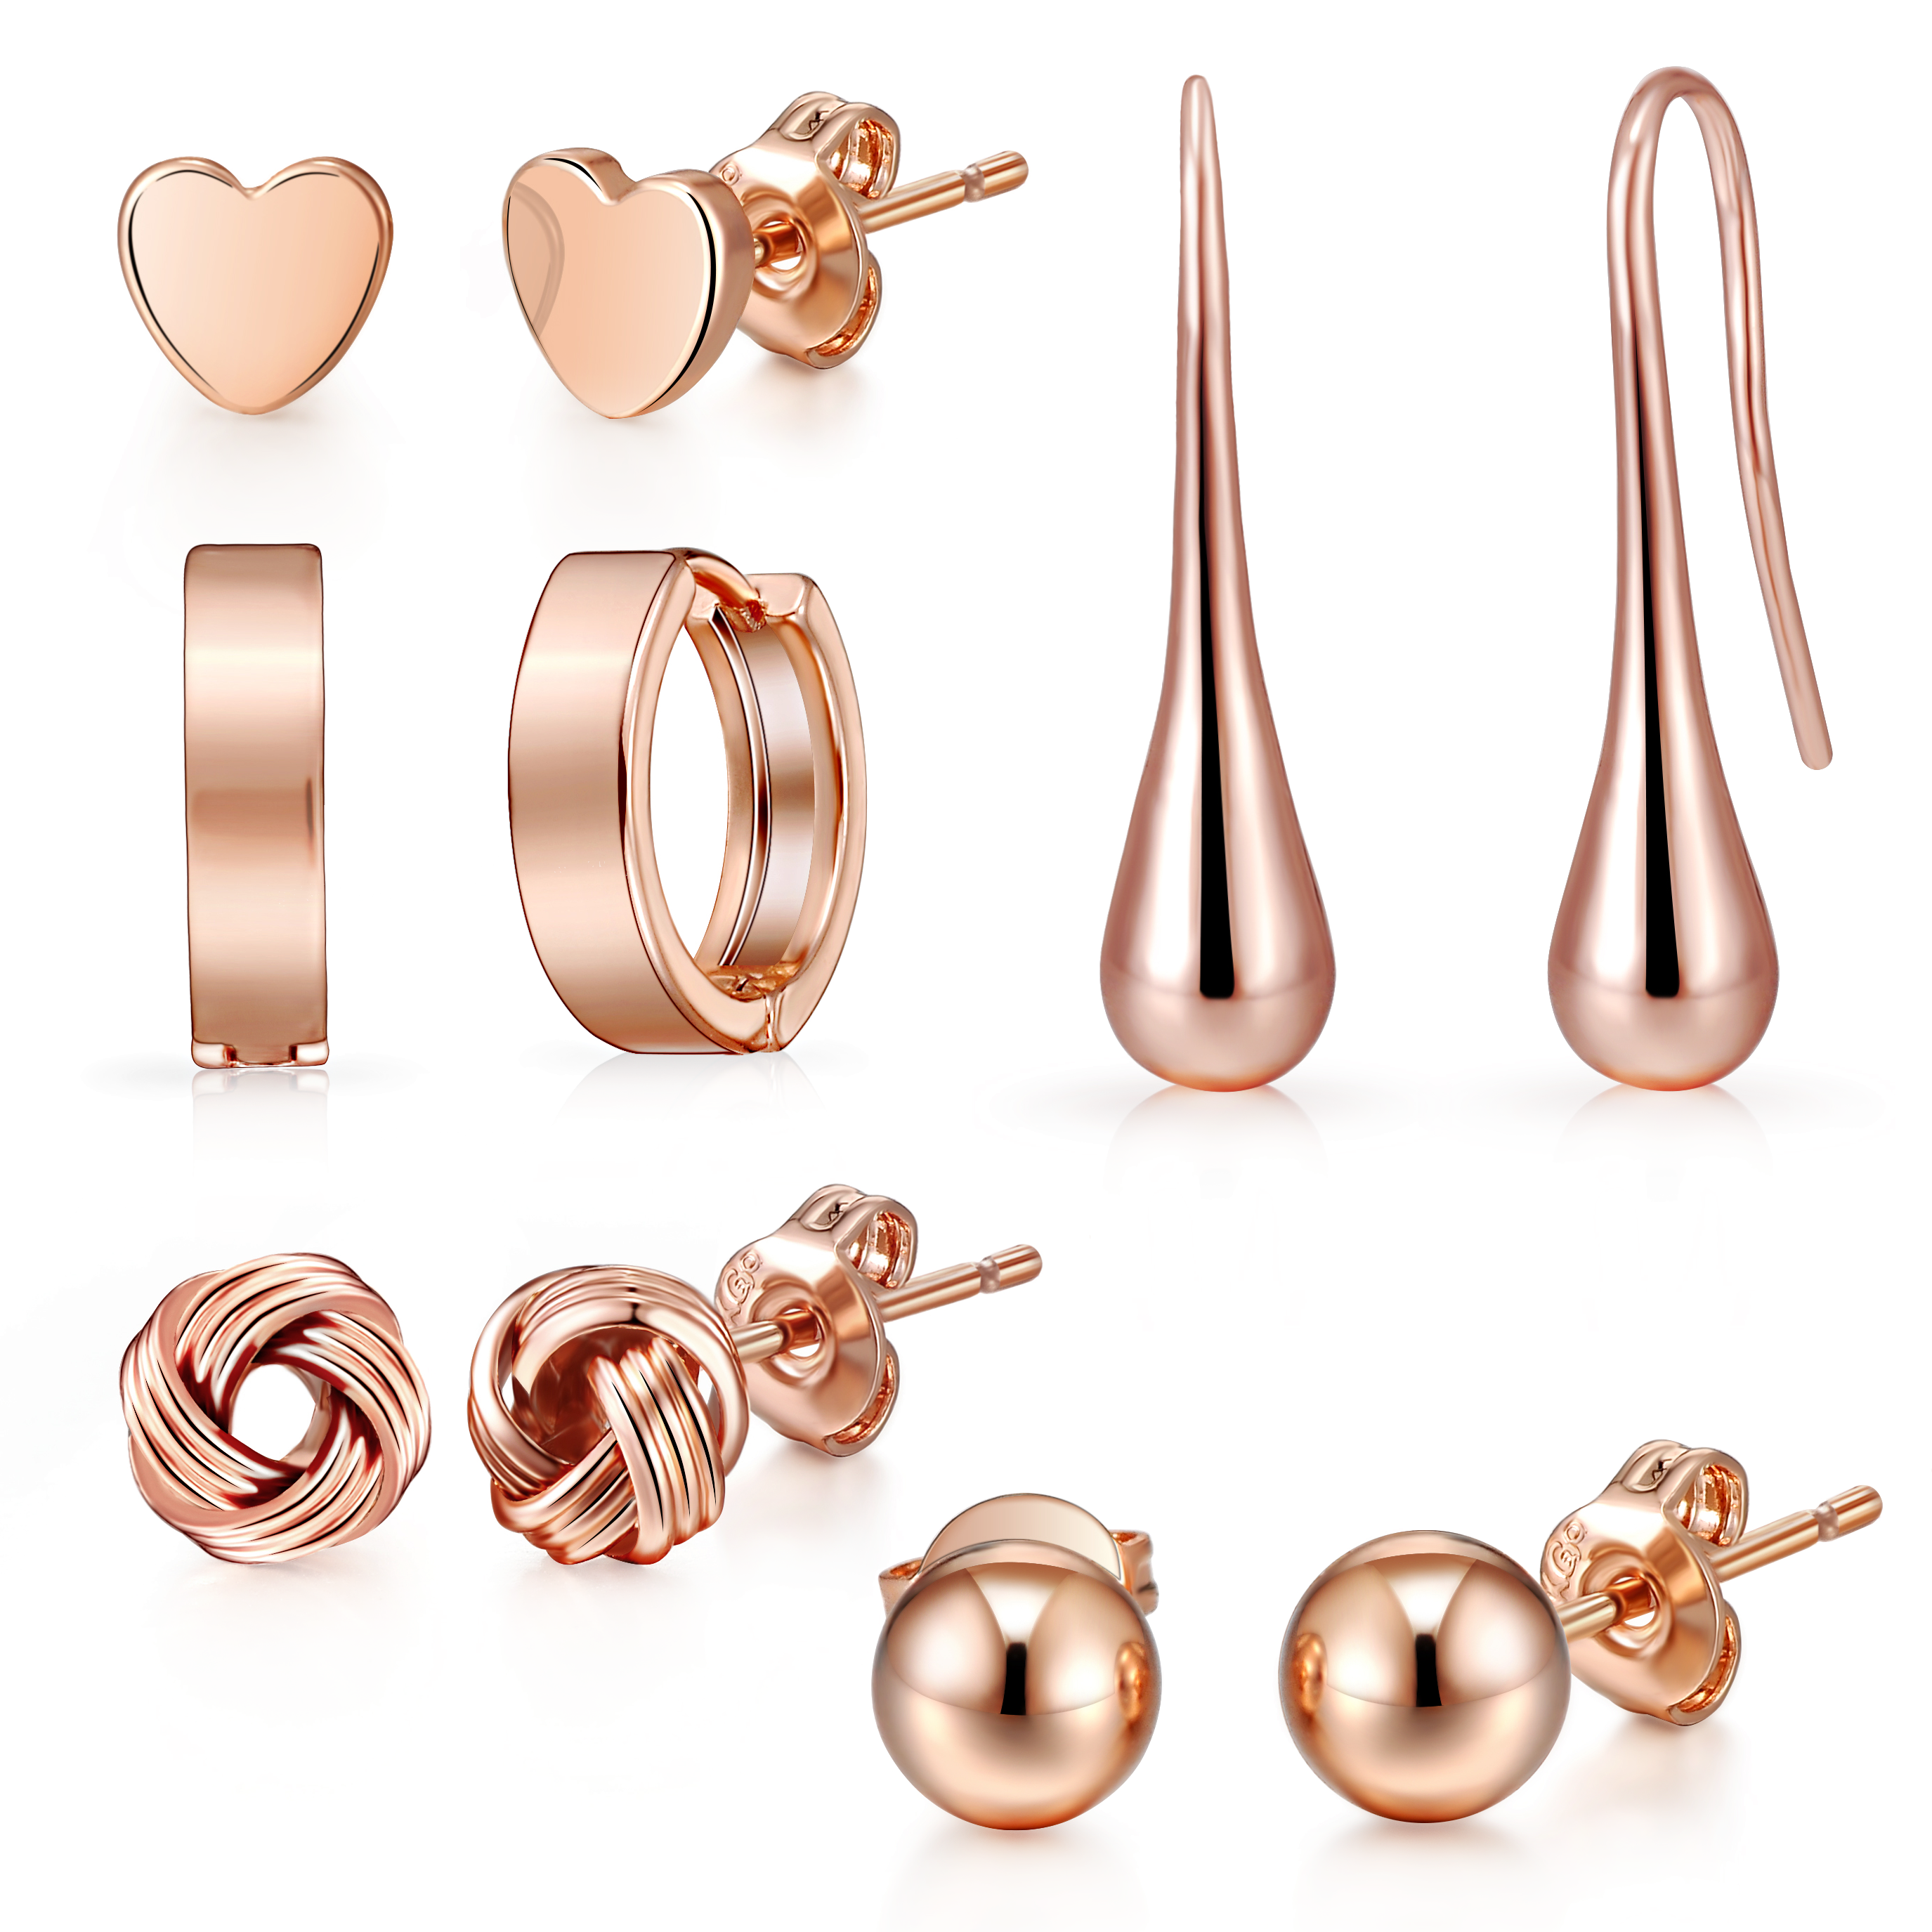 5 Pairs of Rose Gold Plated Earrings by Philip Jones Jewellery